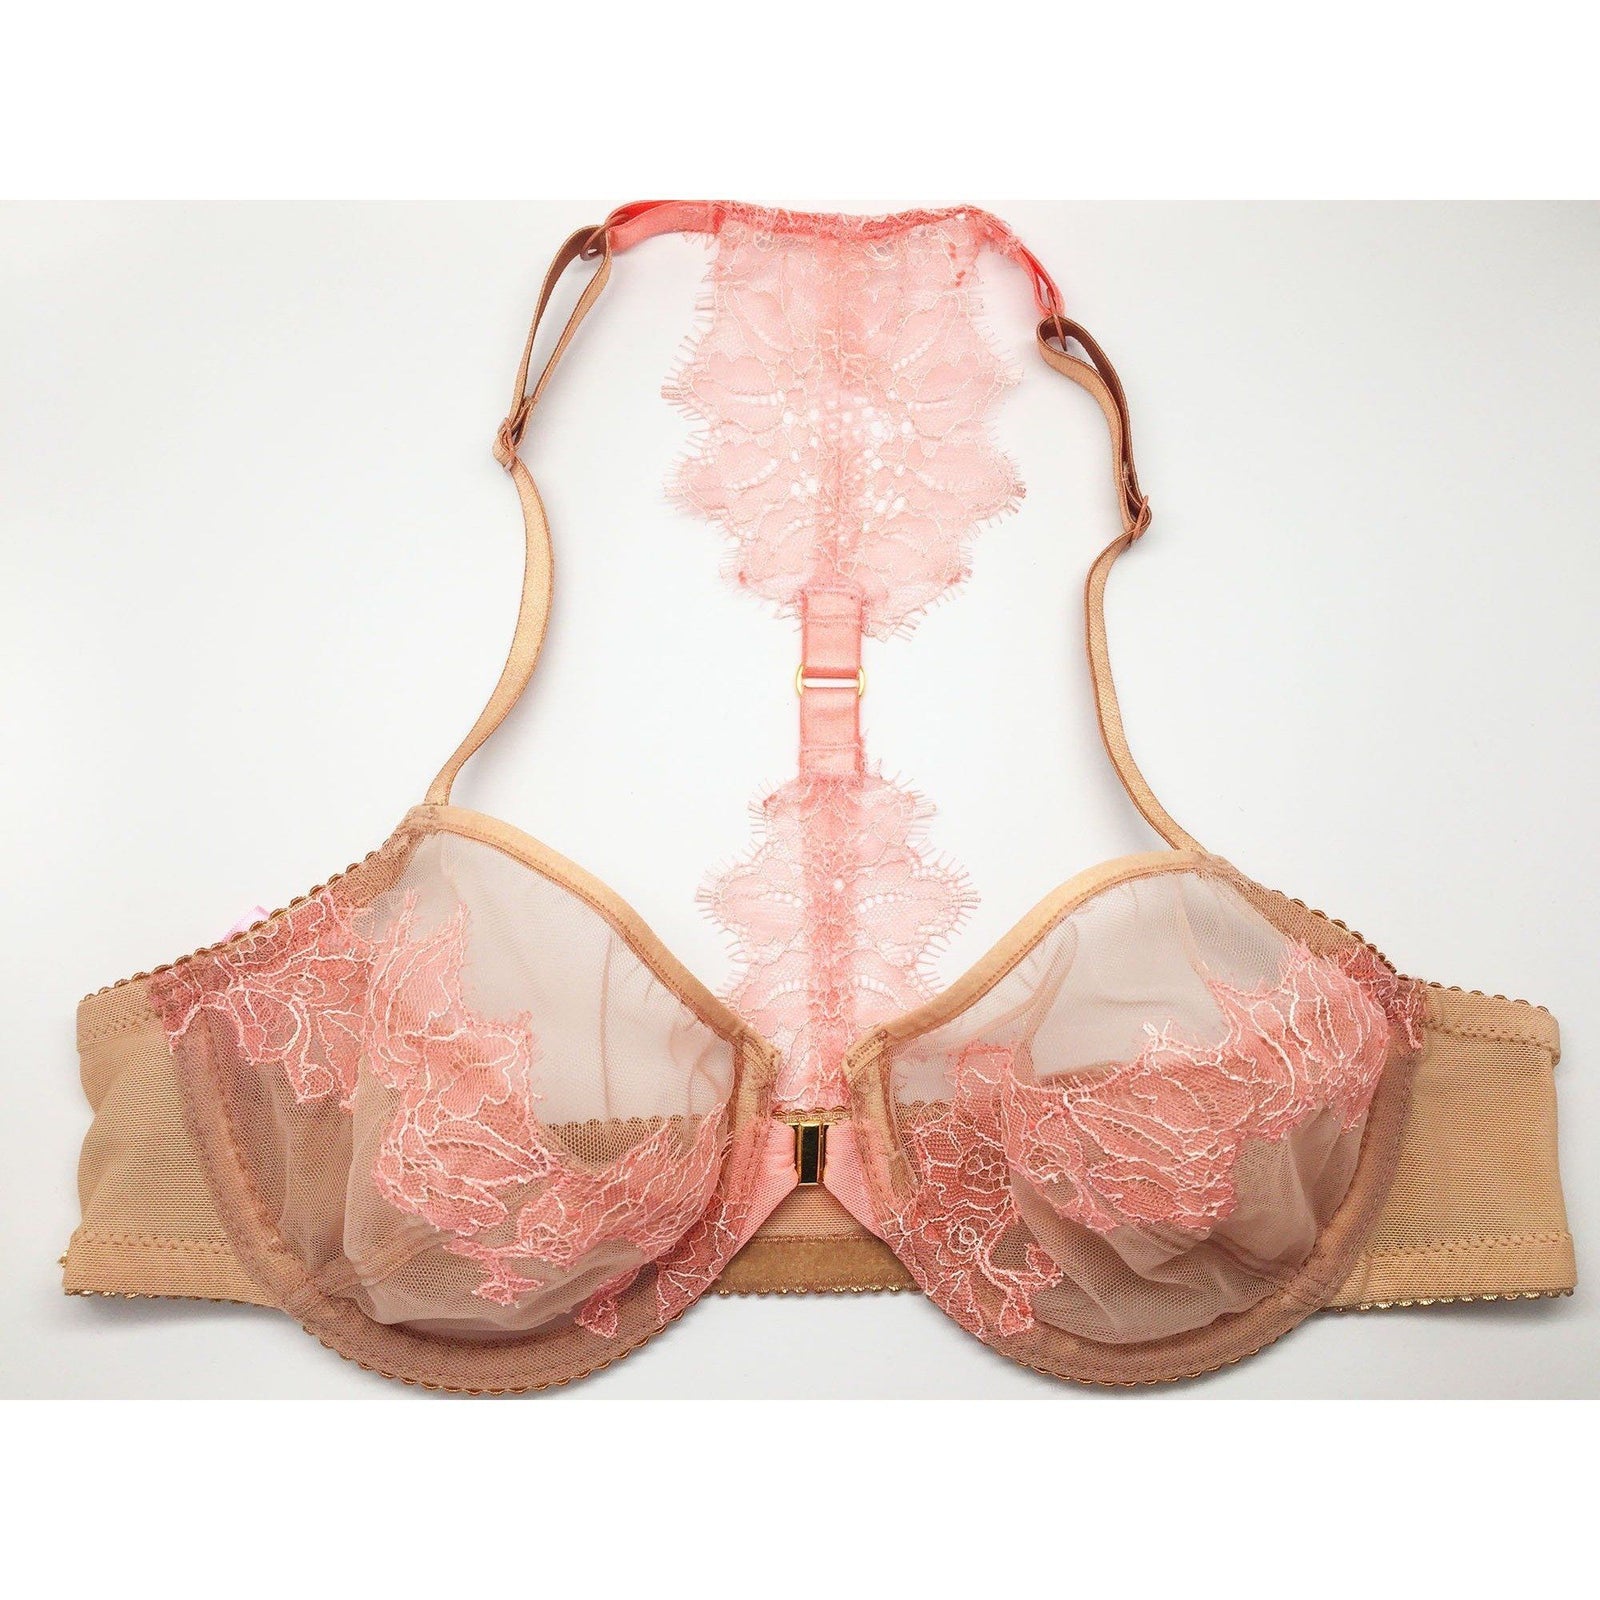 Lingerie Set - Amber Kai Allister Bra Lace Appliqued Cups & Meena Kay High-Waisted Hipster Nude/Salmon Rose